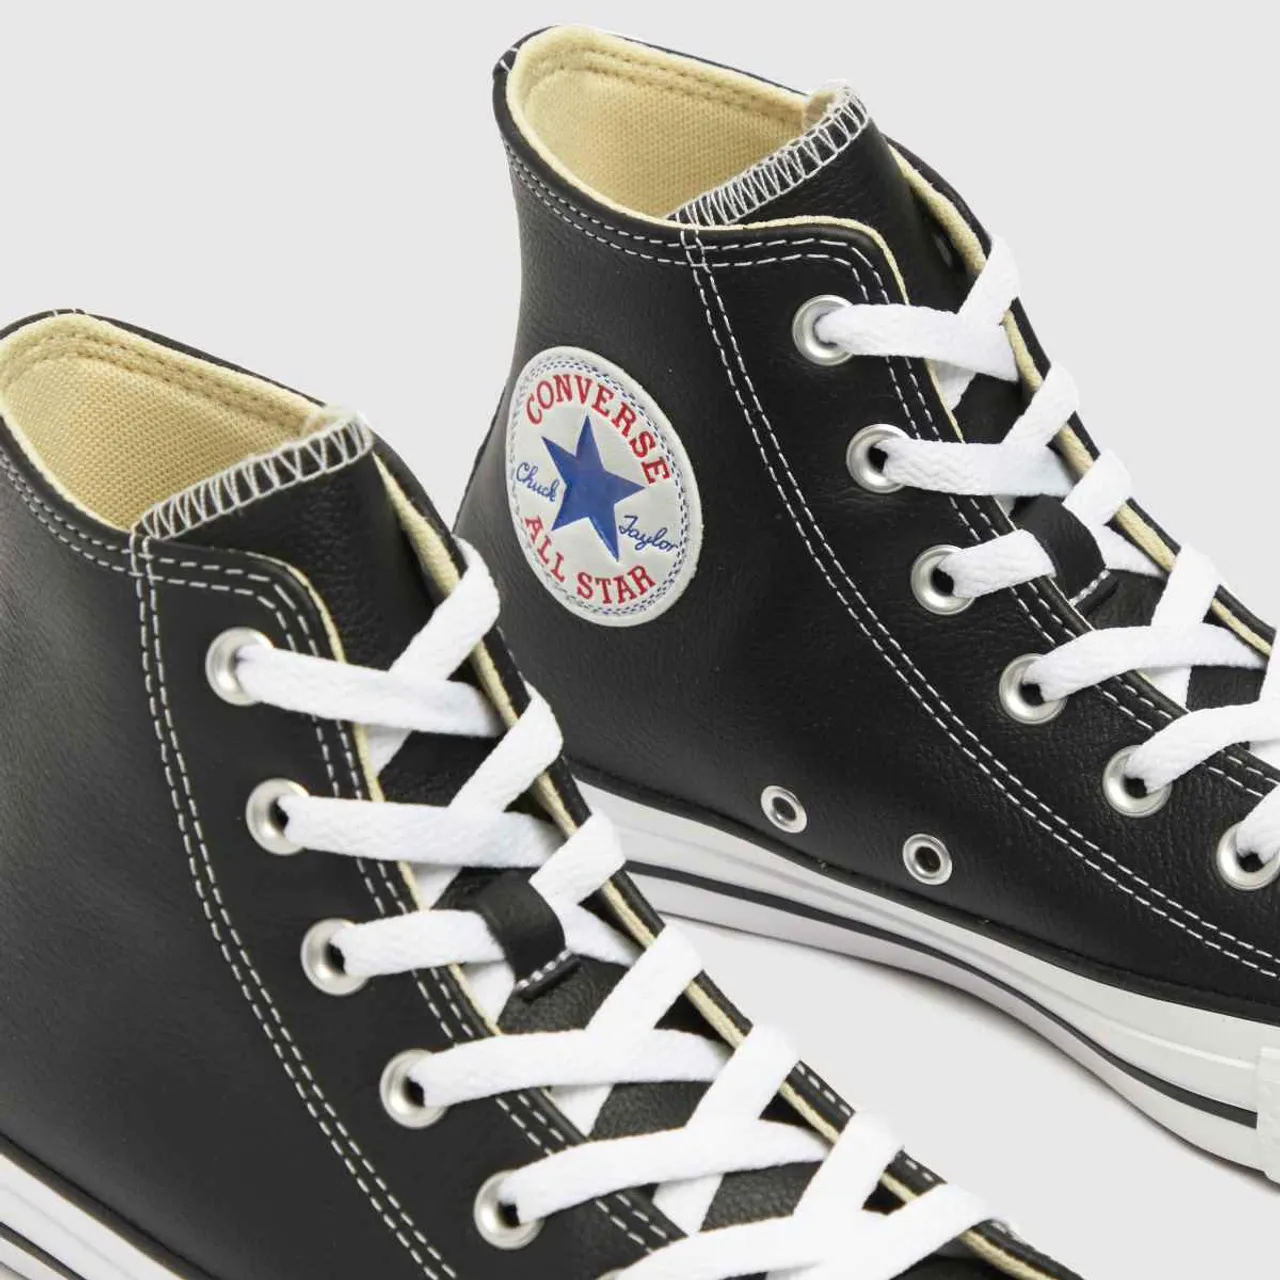 Converse All Star Hi Leather Trainers In Black & White